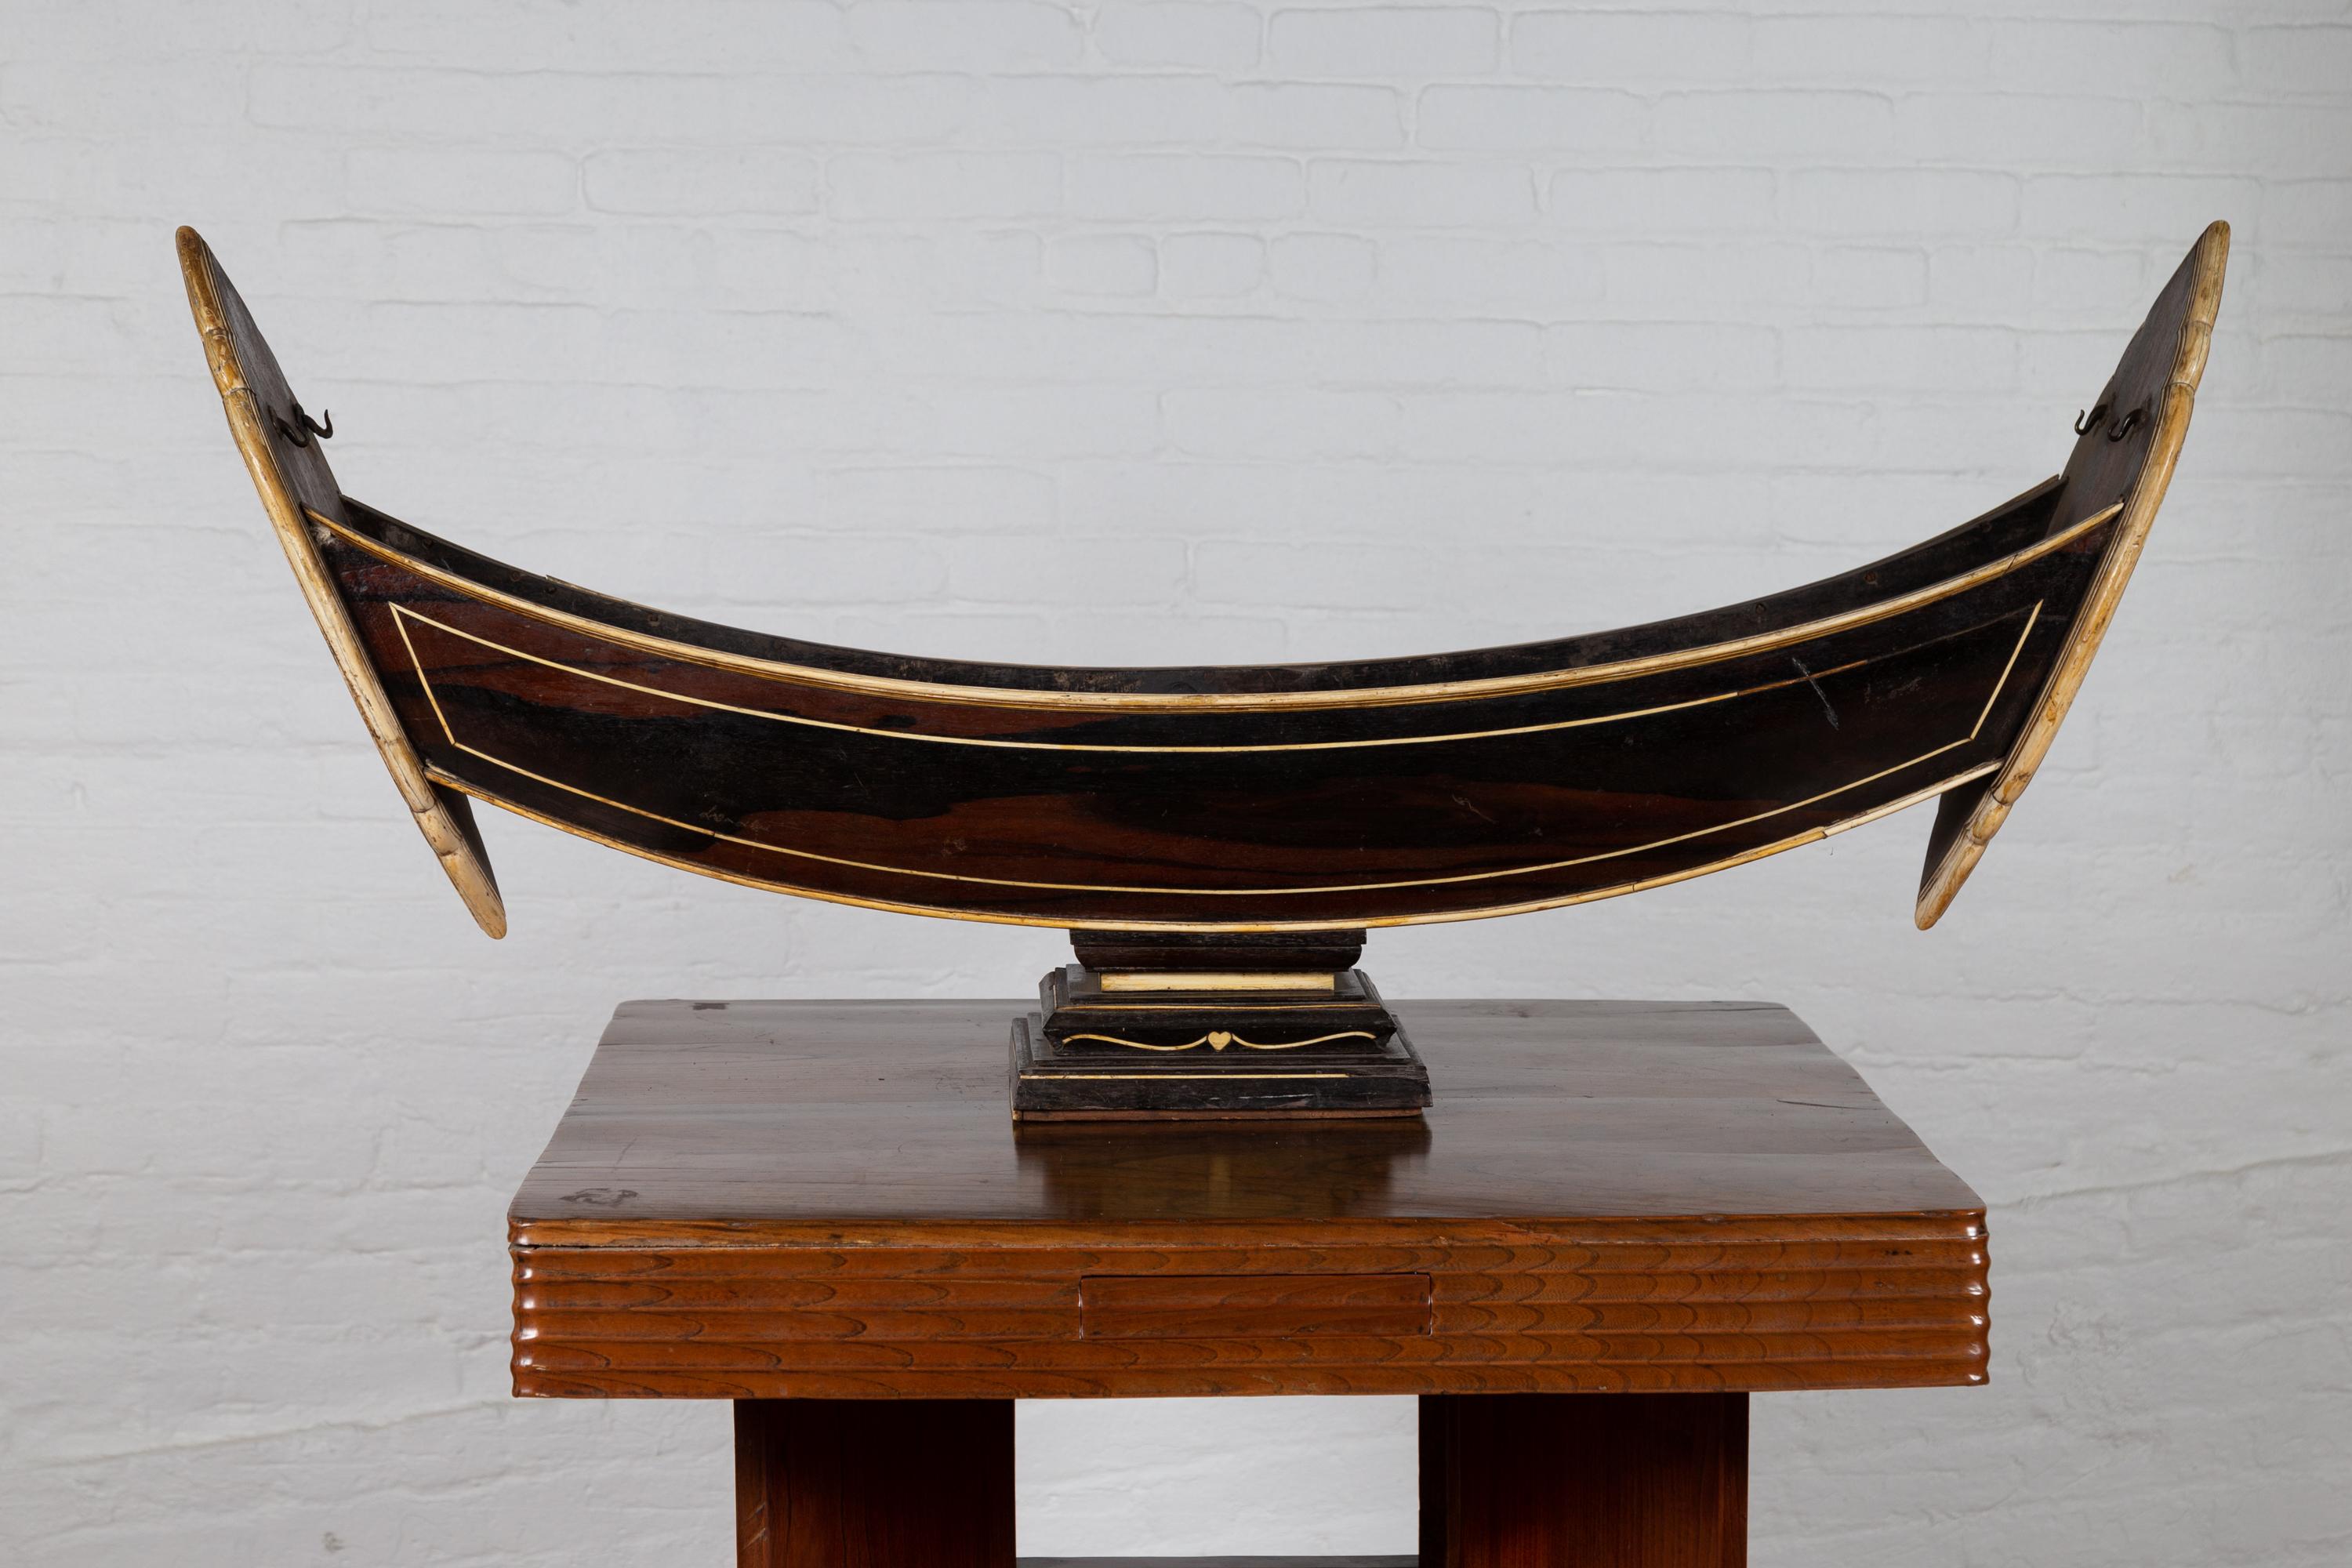 An antique Indonesian handmade boat model on pedestal from the early 20th century, with bone inlay over wood. Born in Indonesia during the early years of the 20th century, this exquisite boat model features a lovely wood finish, accented by a